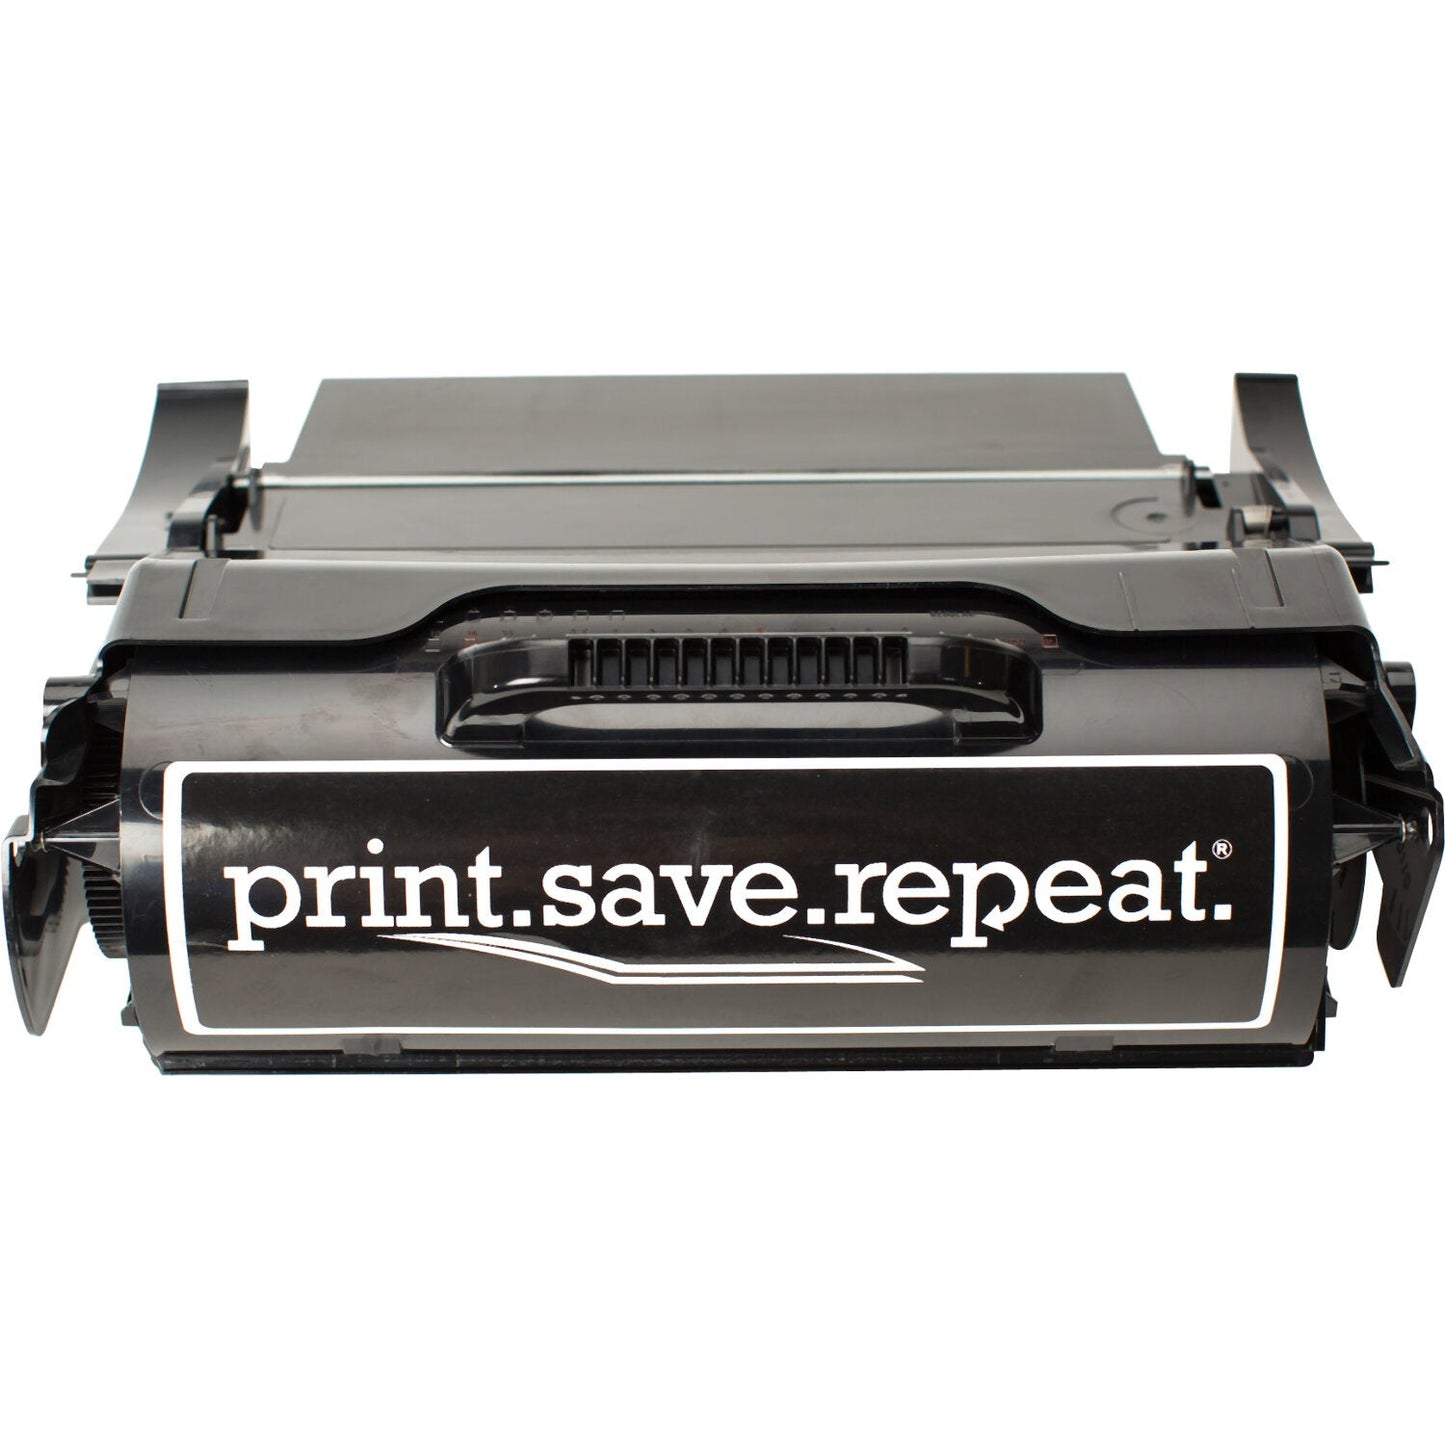 Print.Save.Repeat. Lexmark X651H11L High Yield Remanufactured Toner Cartridge for Lexmark X651, X652, X654, X656, X658 [25,000 Pages] (Latin America)